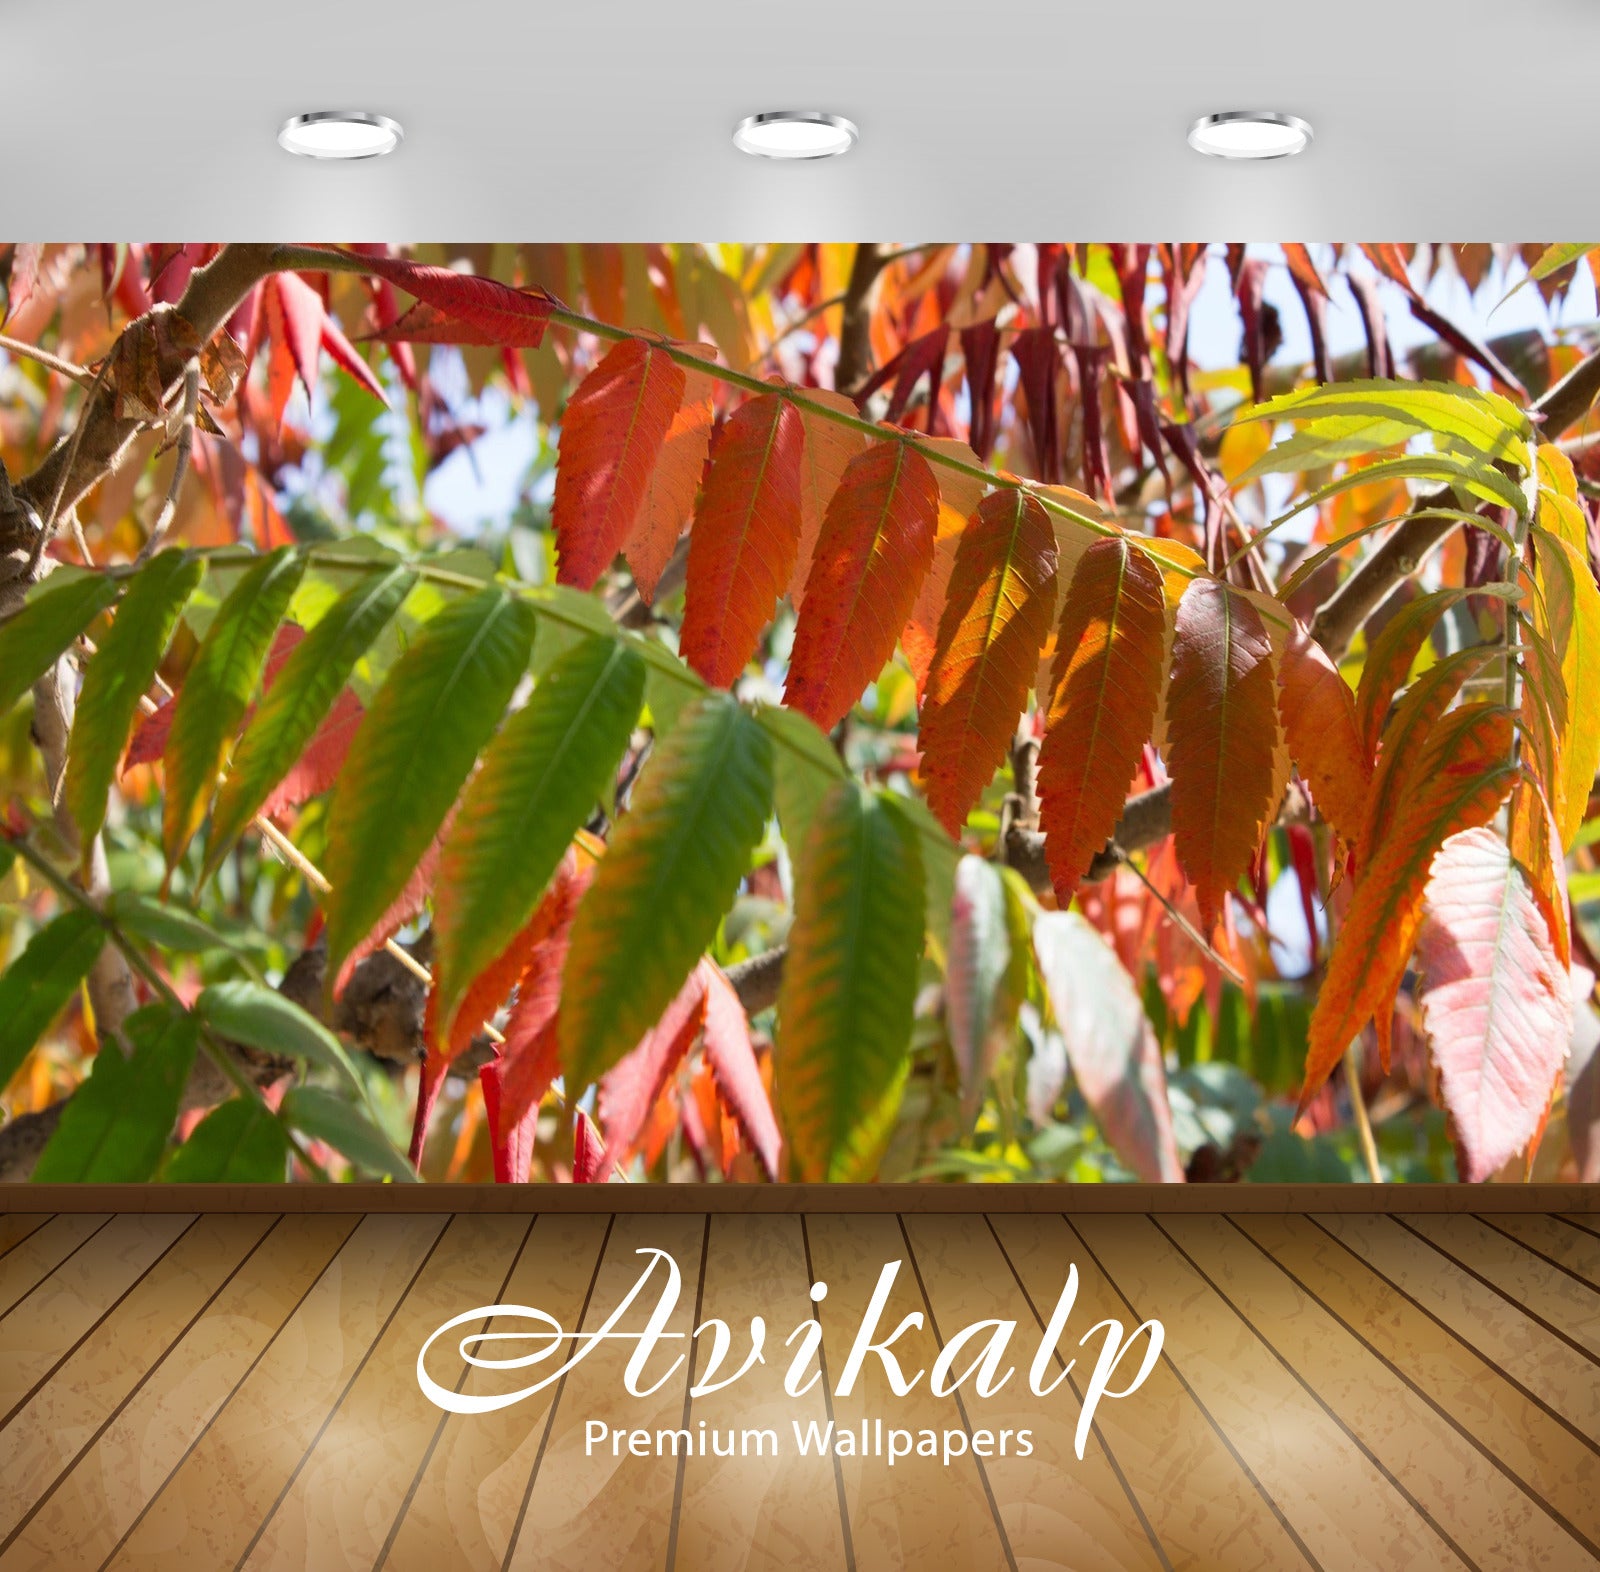 Avikalp Exclusive Awi5348 Colorful Leaves In The Sunshine Nature Full HD Wallpapers for Living room,